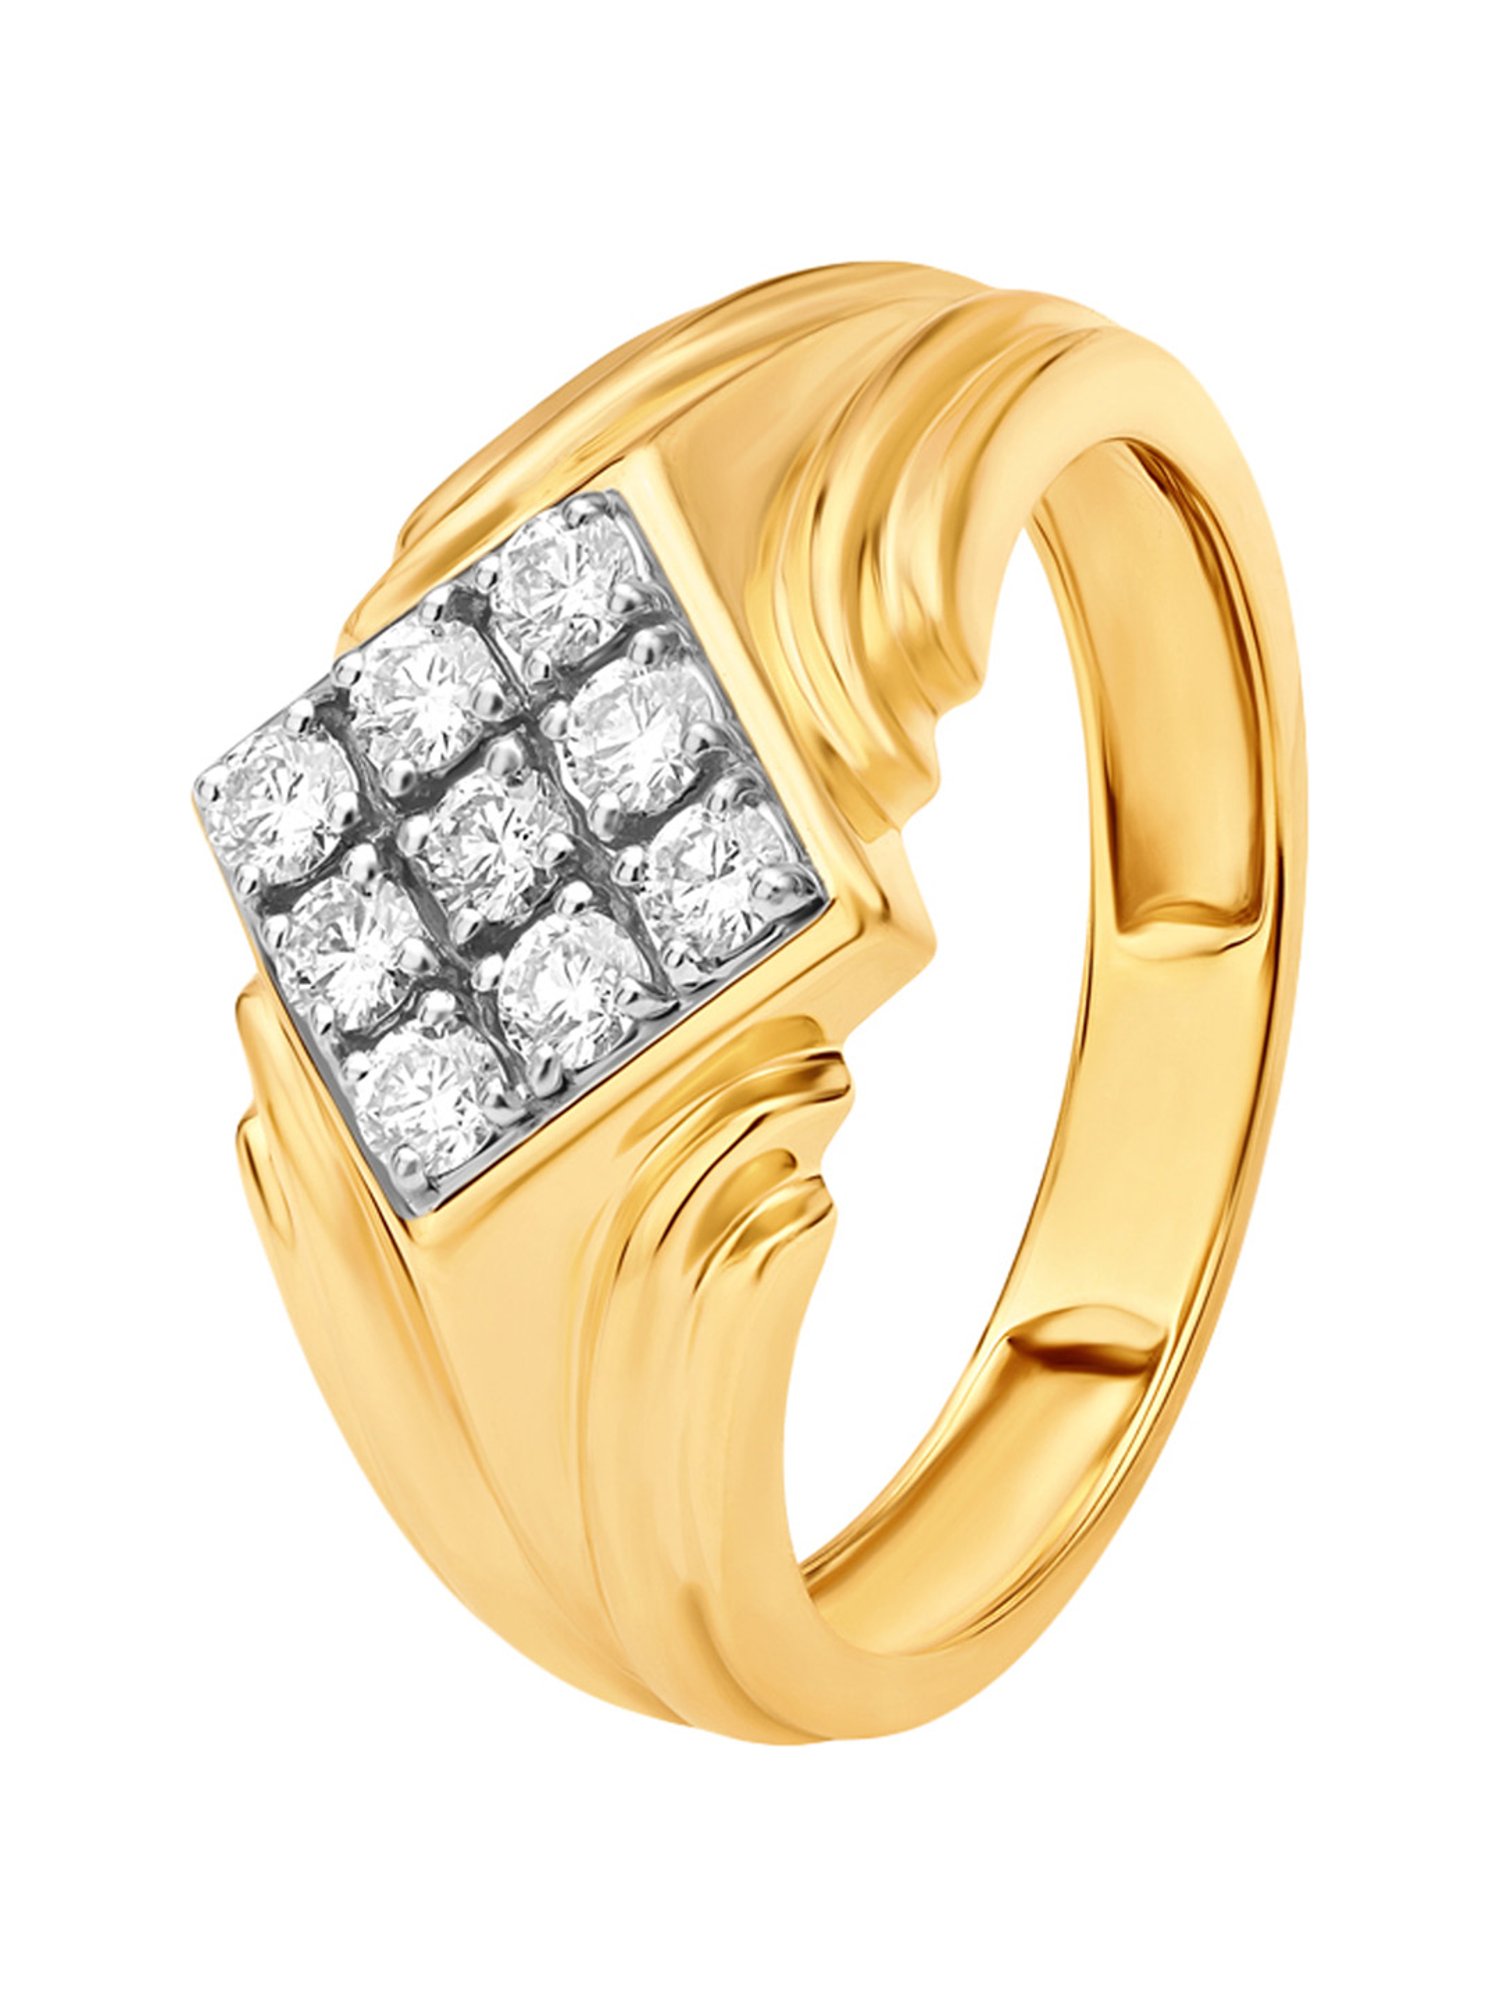 Buy Religious Square Gold Ring For Men at Best Price | Tanishq US